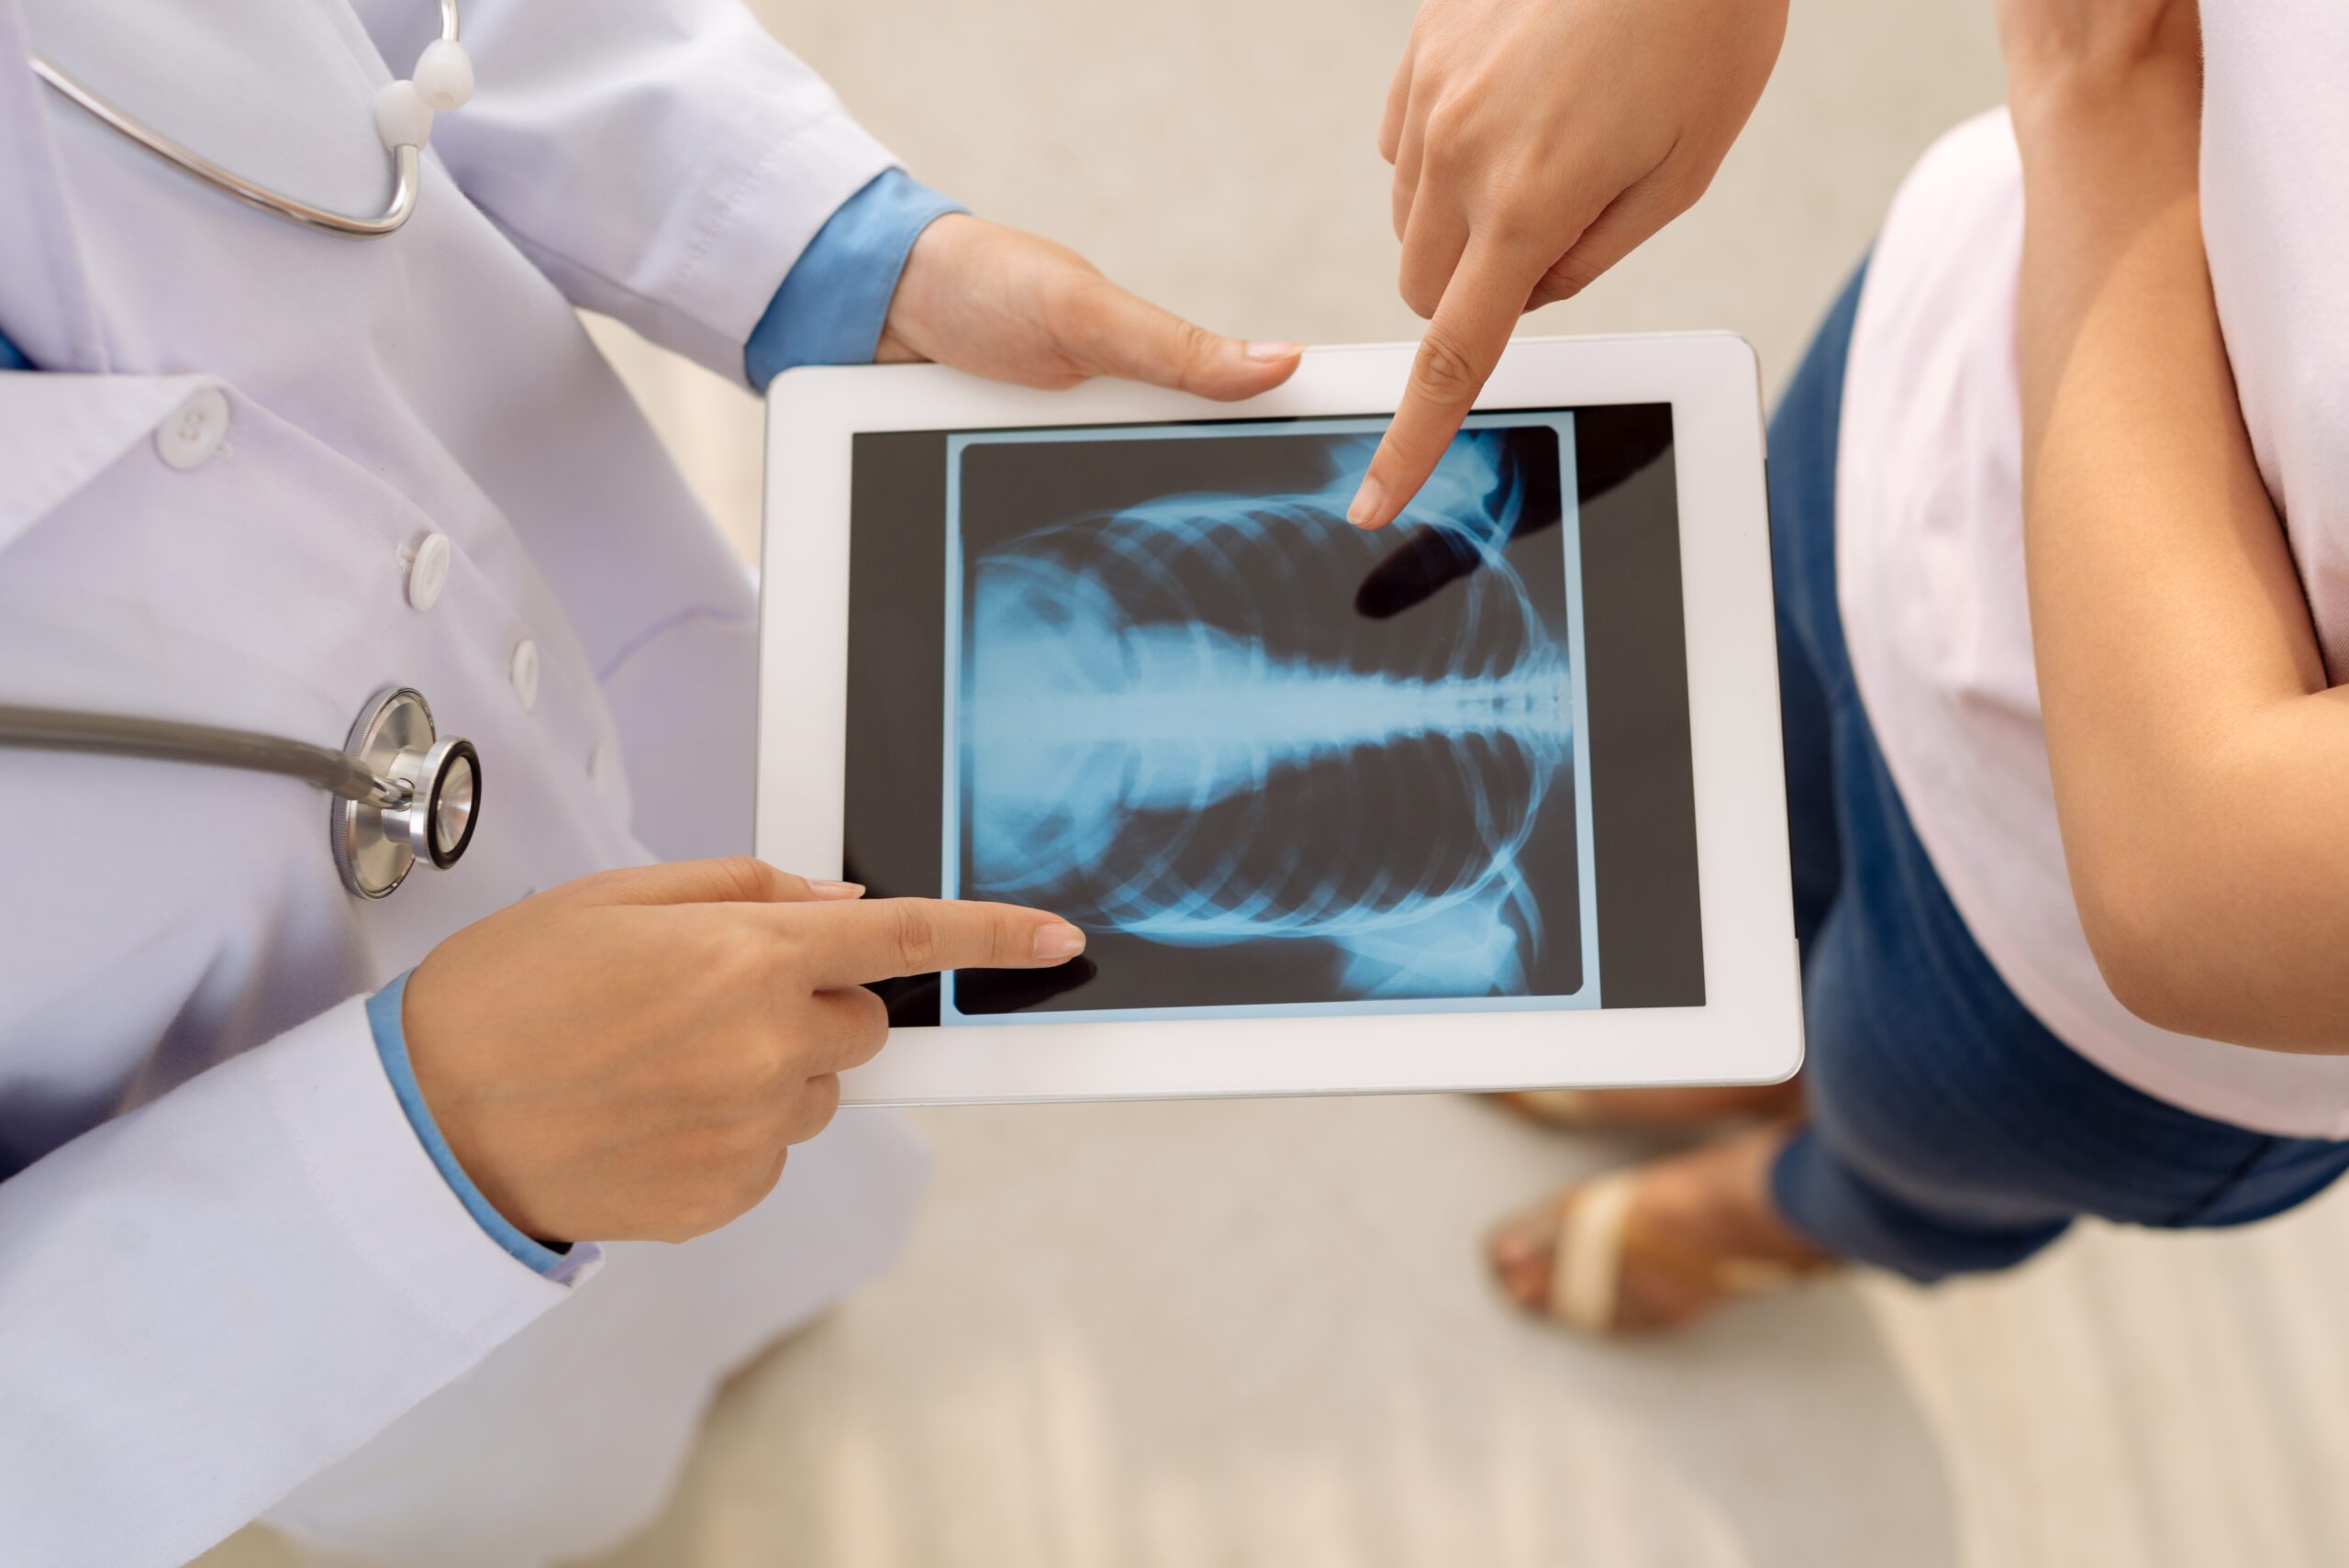 Doctor showing chest x-ray on digital tablet to female patient, view from above